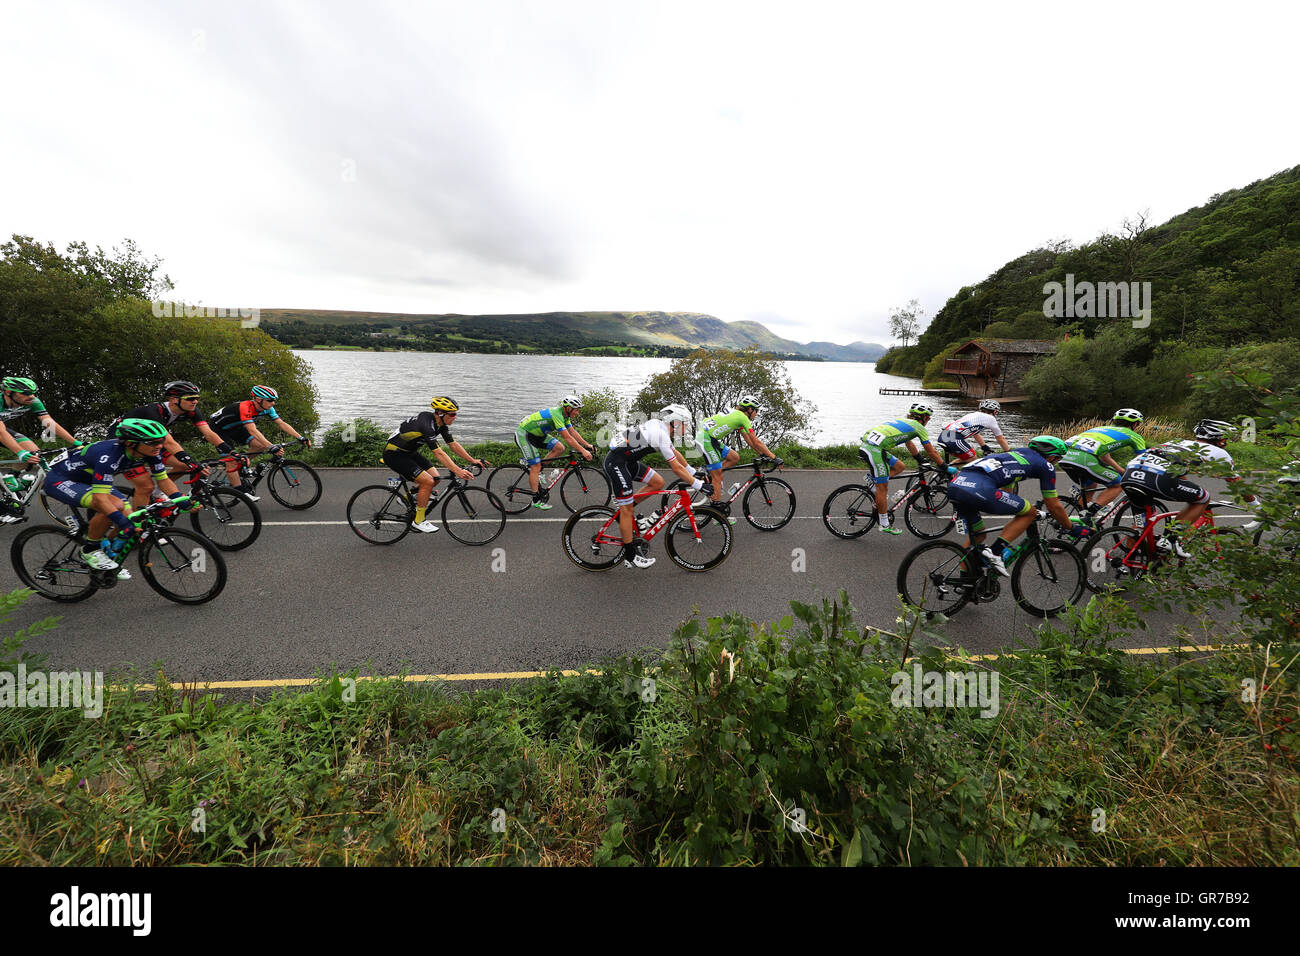 General view of the Tour of Britain in action at Ullswater, Lake District during stage two of the 2016 Tour of Britain. PRESS ASSOCIATION Photo. Picture date: Monday September 5, 2016. See PA story CYCLING Tour of Britain. Photo credit should read: Owen Humphreys/PA Wire Stock Photo